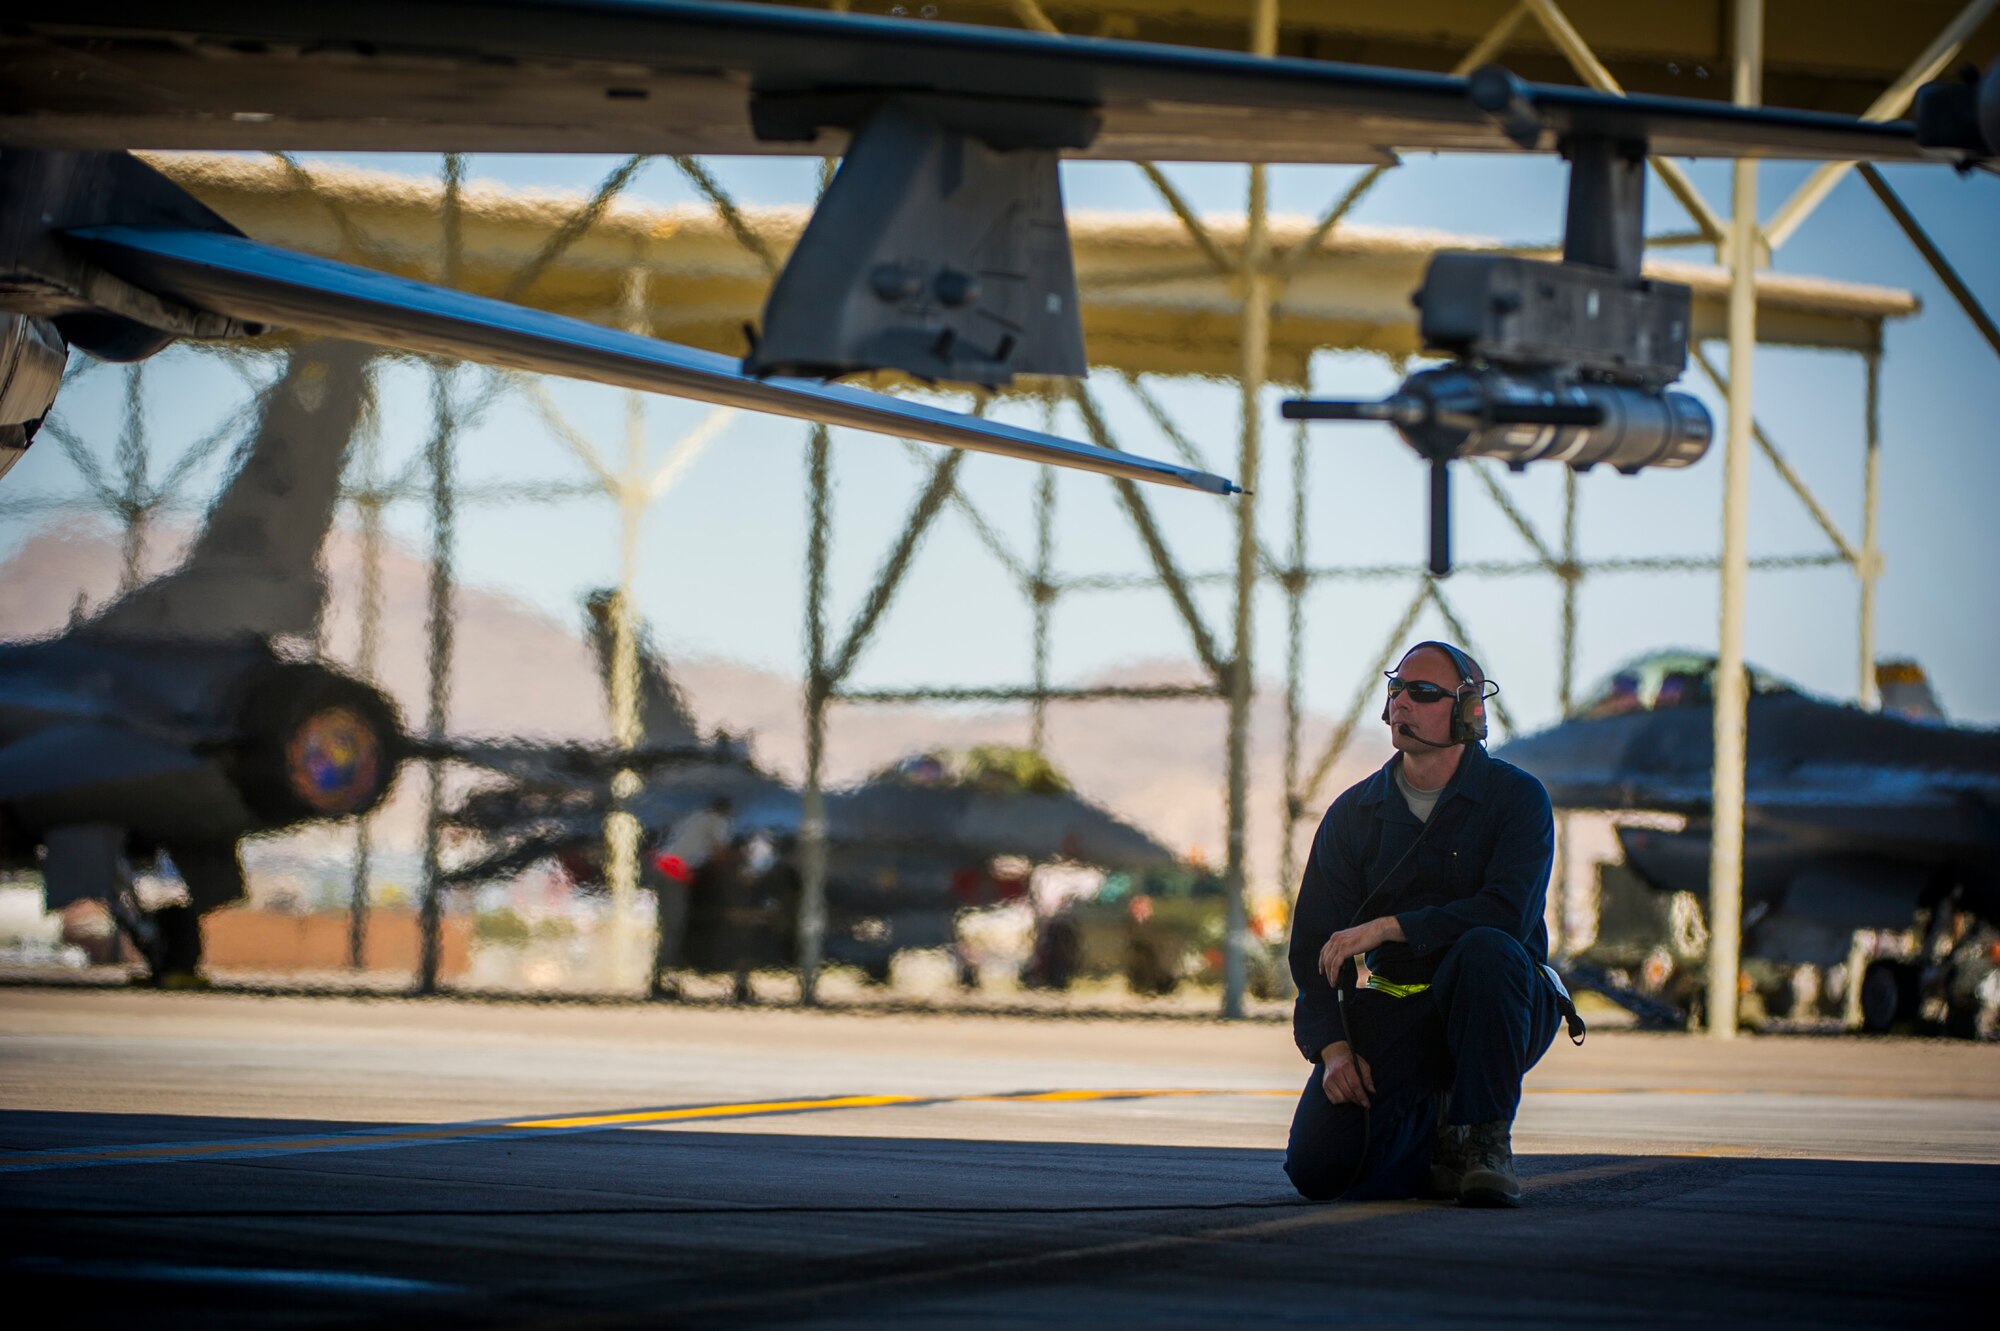 Airman 1st Class Russell Lee, 57th Aircraft Maintenance Squadron crew chief, conducts pre-flight checks July 16, 2019, at Nellis Air Force Base, Nev. Red Flag focuses on the application of core missions to include Command and Control, Intelligence Surveillance, Strike and Personnel Recovery and how to work with Coalition counterparts to ensure success. The 706th Fighter Squadron oversees Air Force Reserve Command members assigned to the U.S. Air Force Warfare Center, supporting missions in its 57th Wing, 53rd Wing and 505th Command and Control Wing. Pilots assigned to the 706 FS fly an array of aircraft to include the F-15C, F-15E, F-16, F-22 and F-35 aircraft. To prepare combat air forces, joint and allied crews with realistic training, pilots in the 706 FS operate with the 64th Aggressor Squadron to facilitate operational threat replication, training, and feedback. The Red Flag exercise will continue through July 26, 2019.